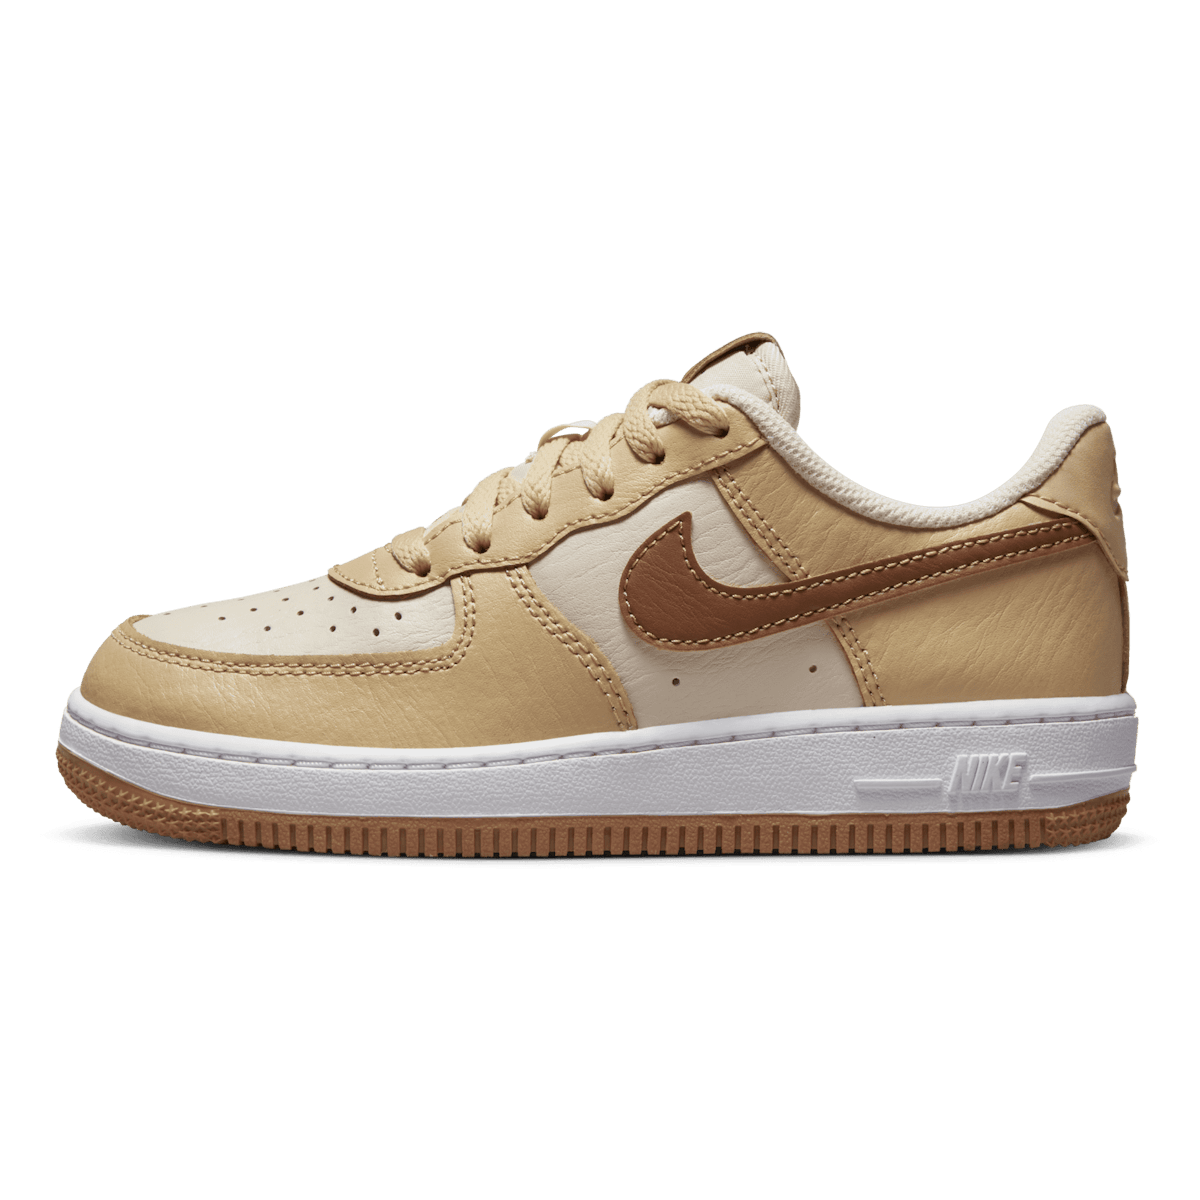 Nike Force 1 LV8 PS "Ale Brown"